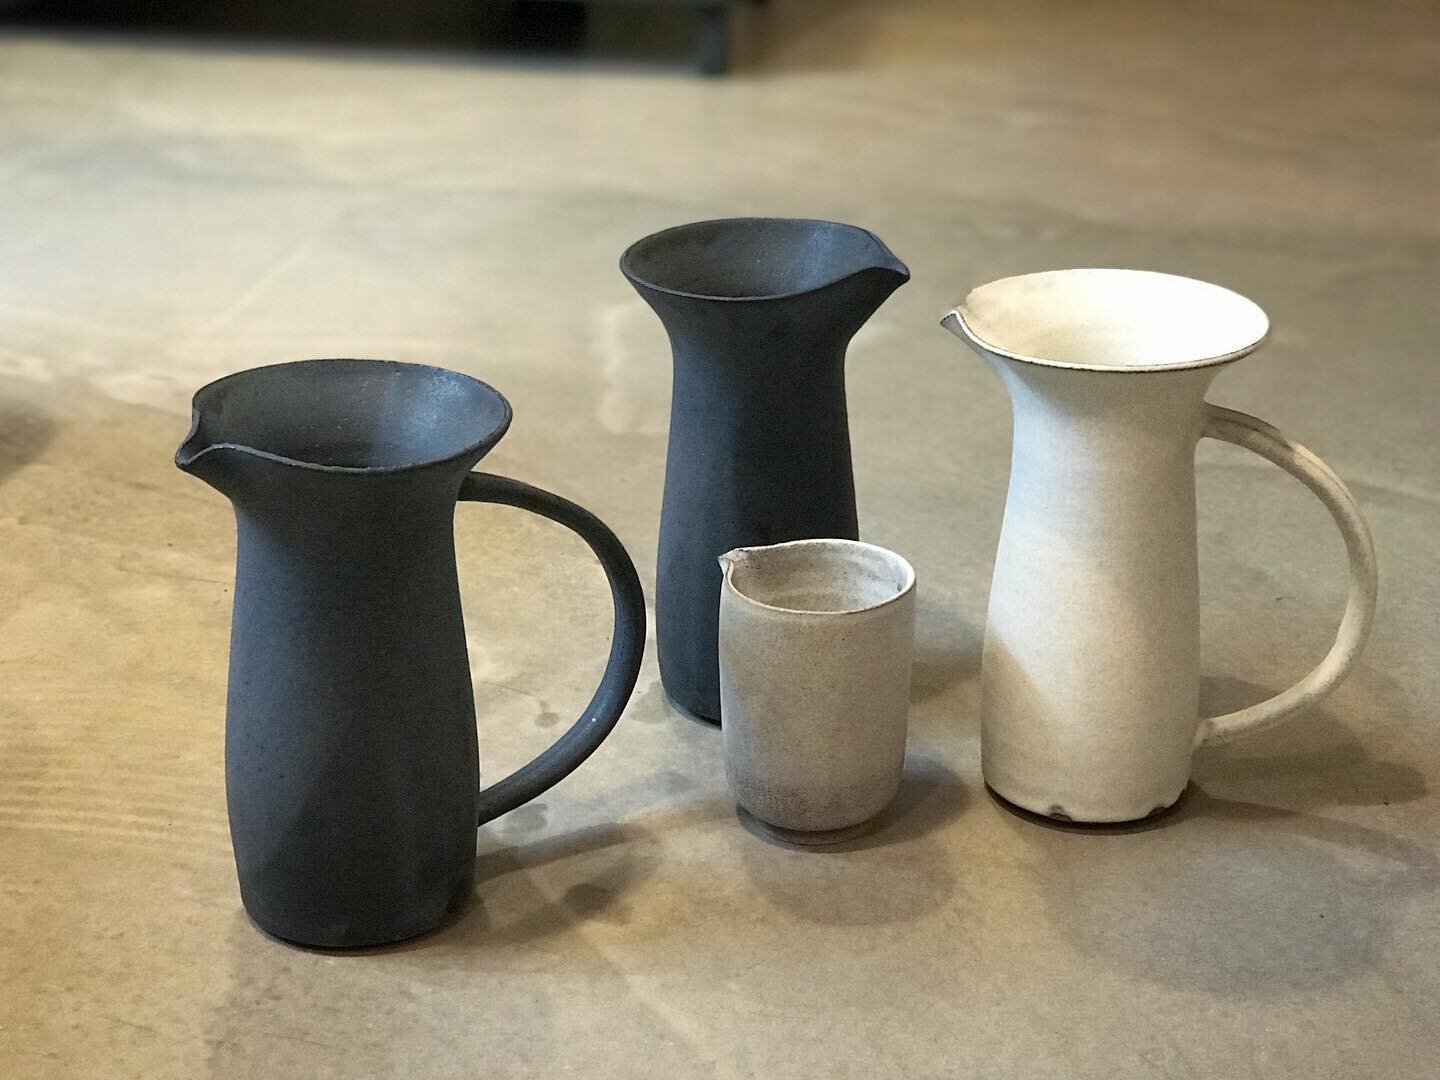 Variation on jug-theme. Big and small, with or without handle, light and dark.

These are off for @houzoslo tomorrow